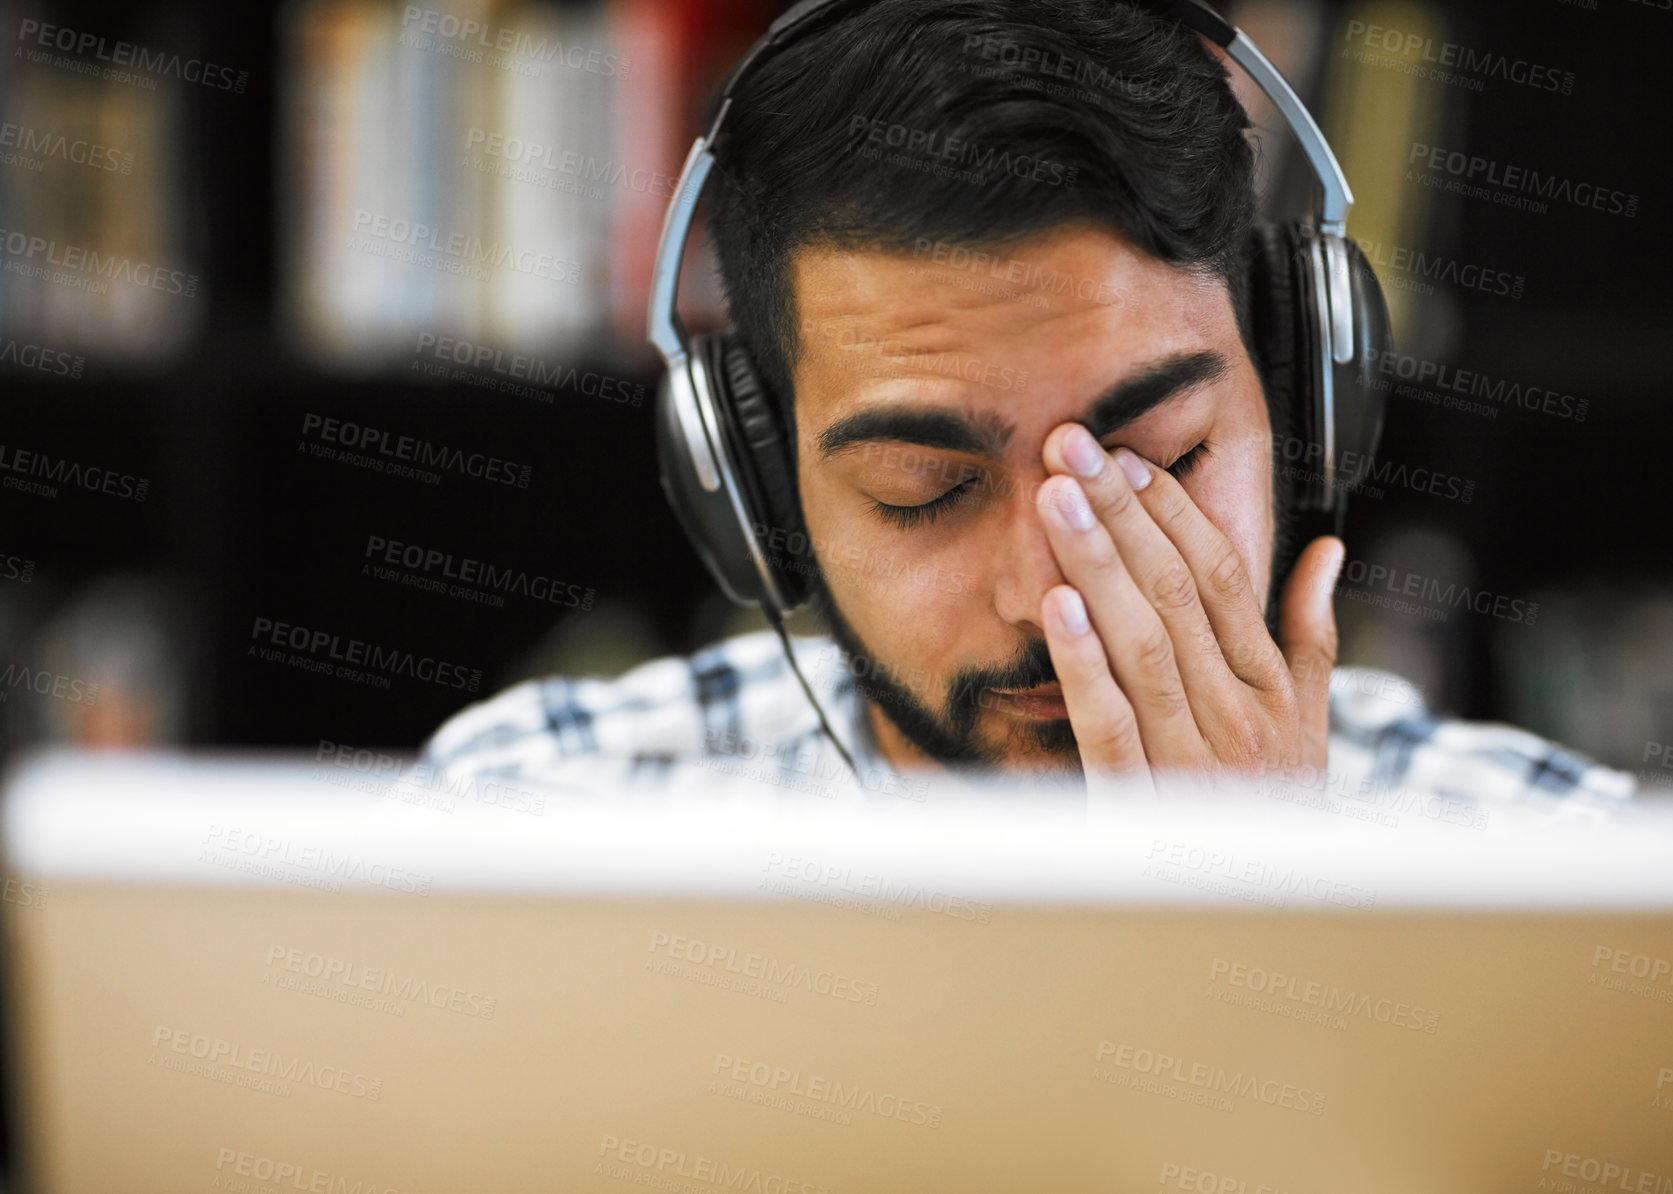 Buy stock photo Closeup shot of a stressed out young man working on a computer while listening to music with his eyes closed